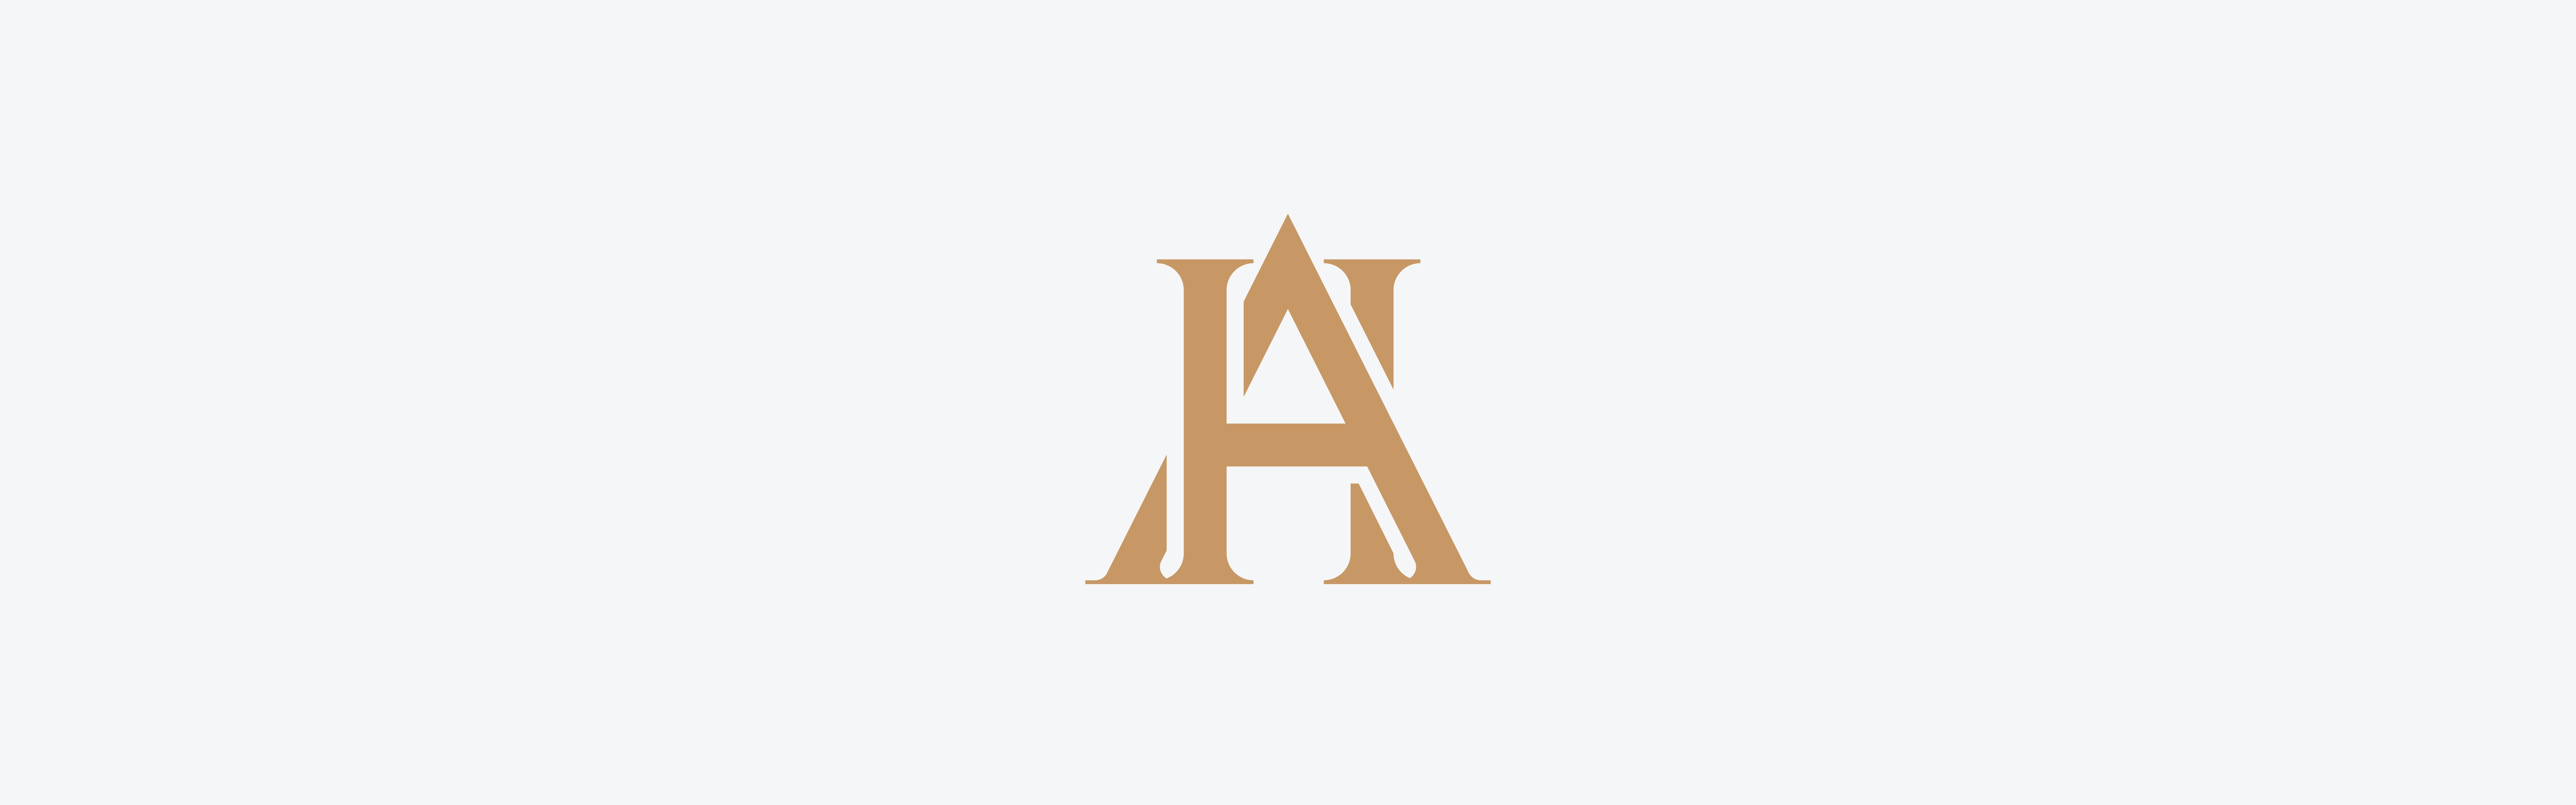 The image displays a letter 'a' designed with serif fonts and presented in a light brown color, capturing the elegance of Hotel Americano, against a white background.